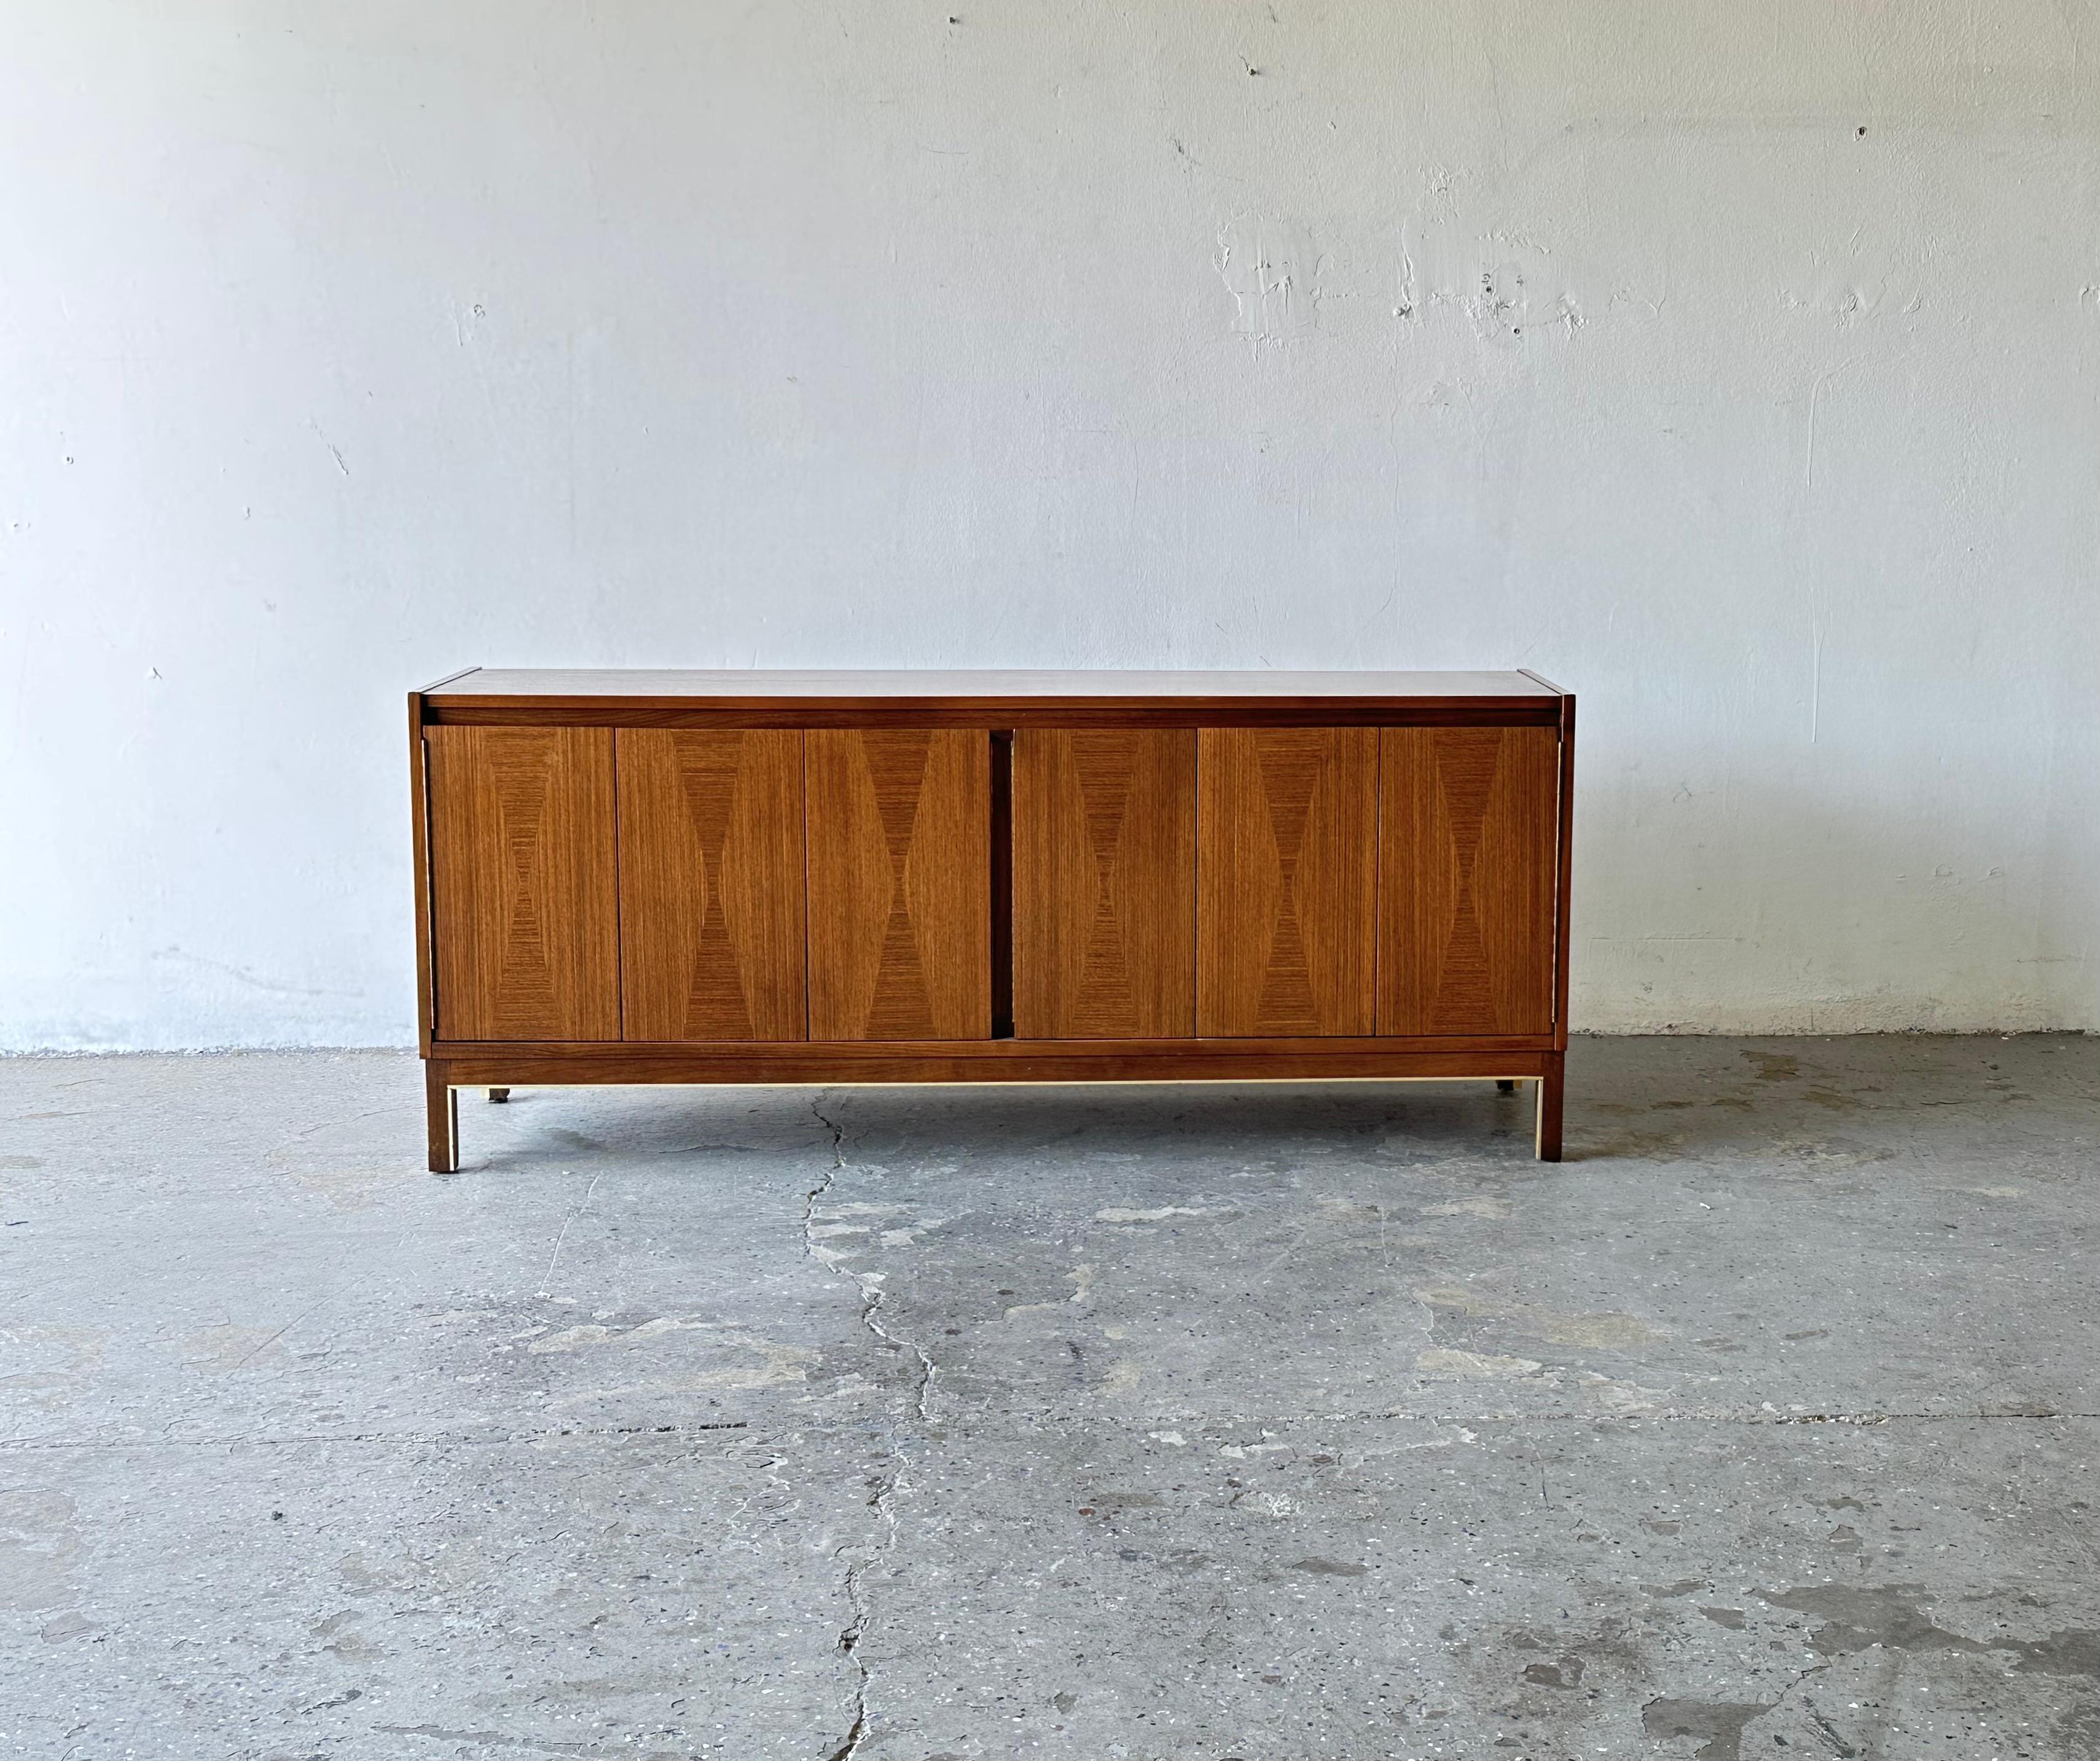 Uber cool Mid-Century Modern small credenza / Media stand by American of Martinsville. This piece has two spacious cabinets with wonderful elongated diamond inlay doors. The walnut wood grain is exquisite from every angle. Brass accents on the